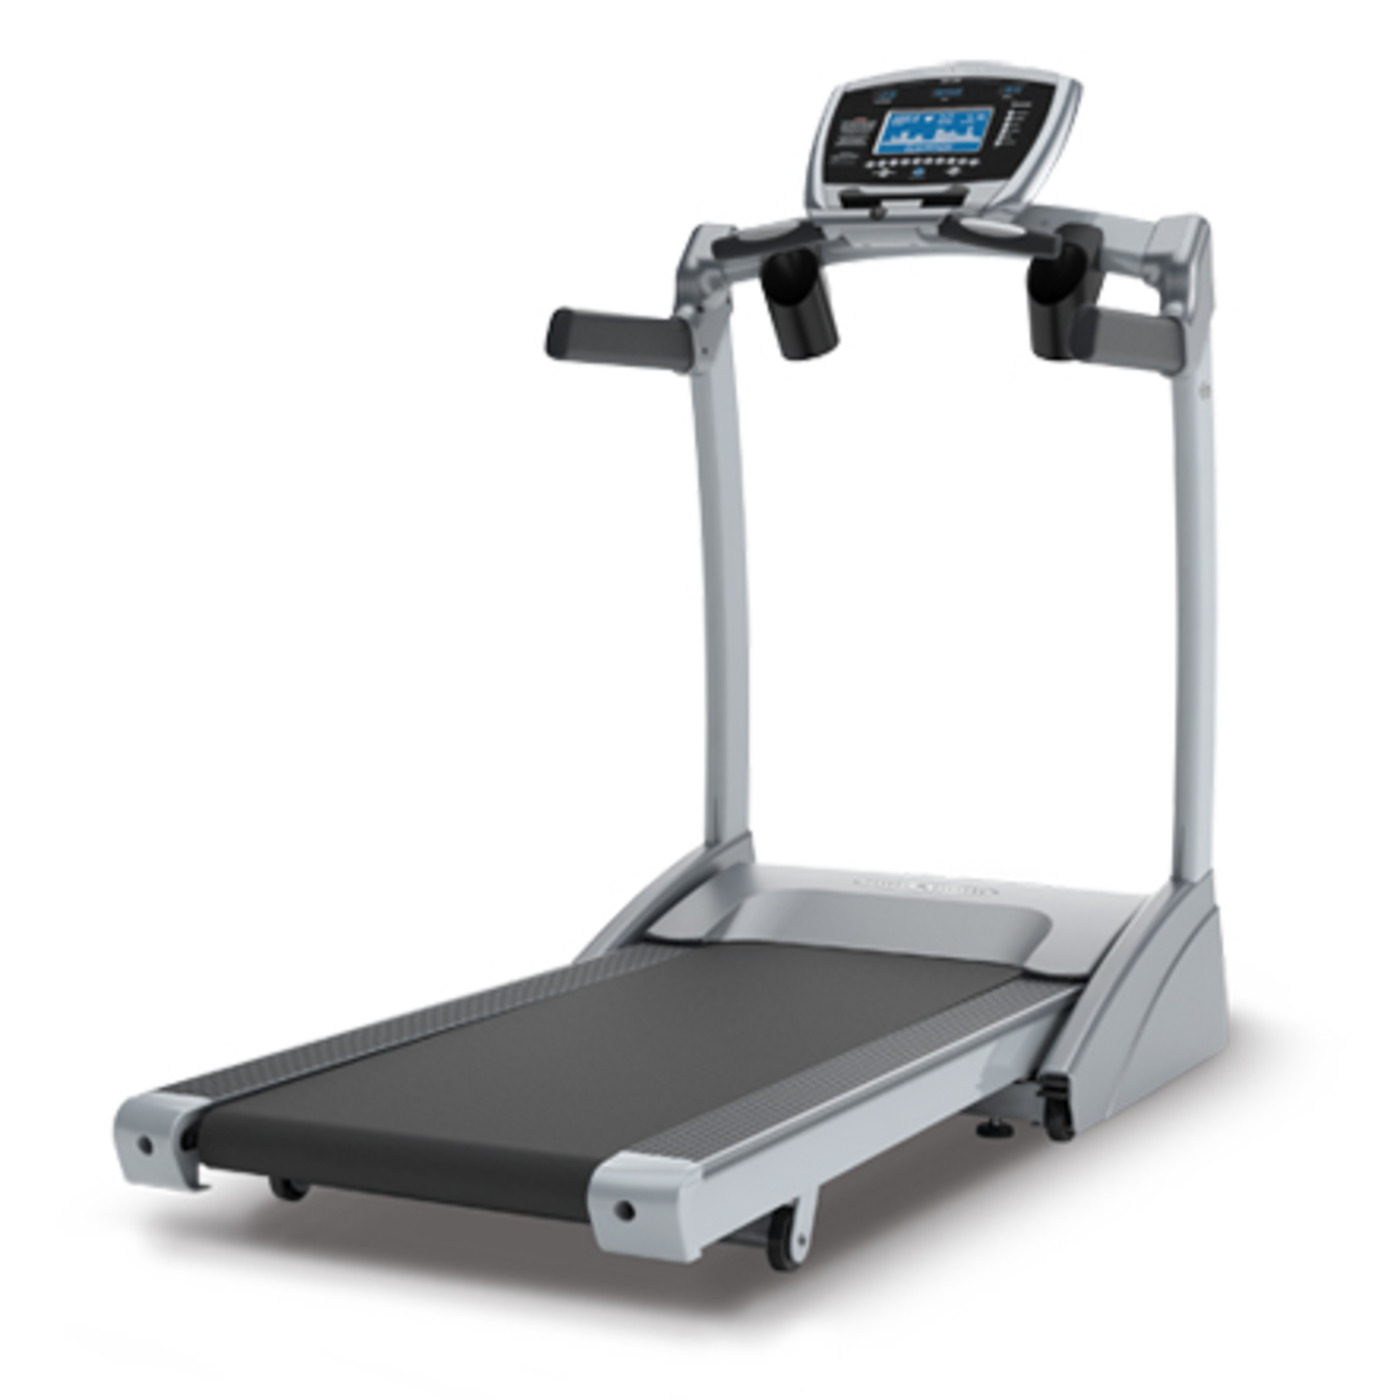 T9250 Treadmill (with New Premier